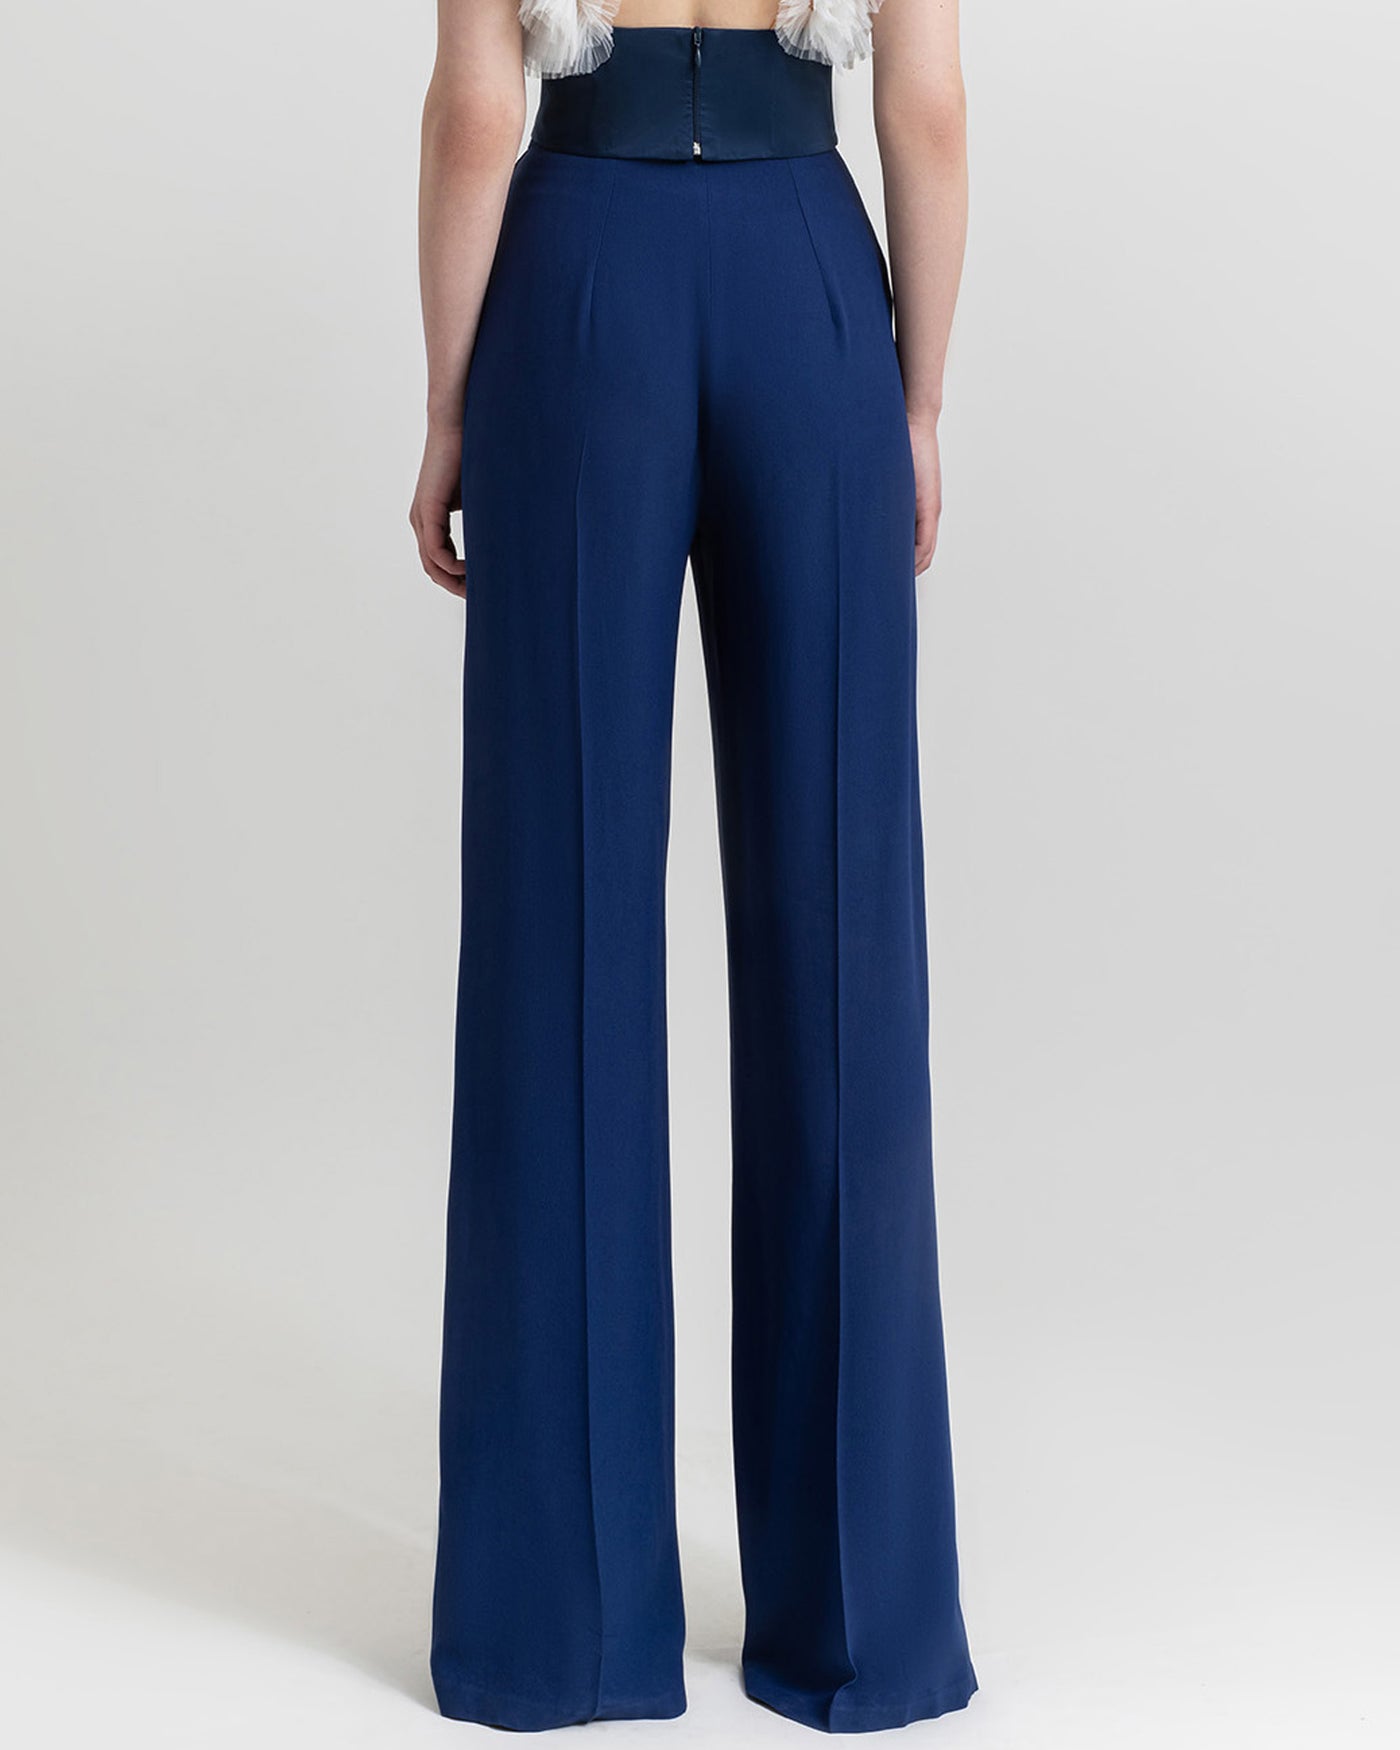 Backless Tulle Top and Straight-Cut Pants